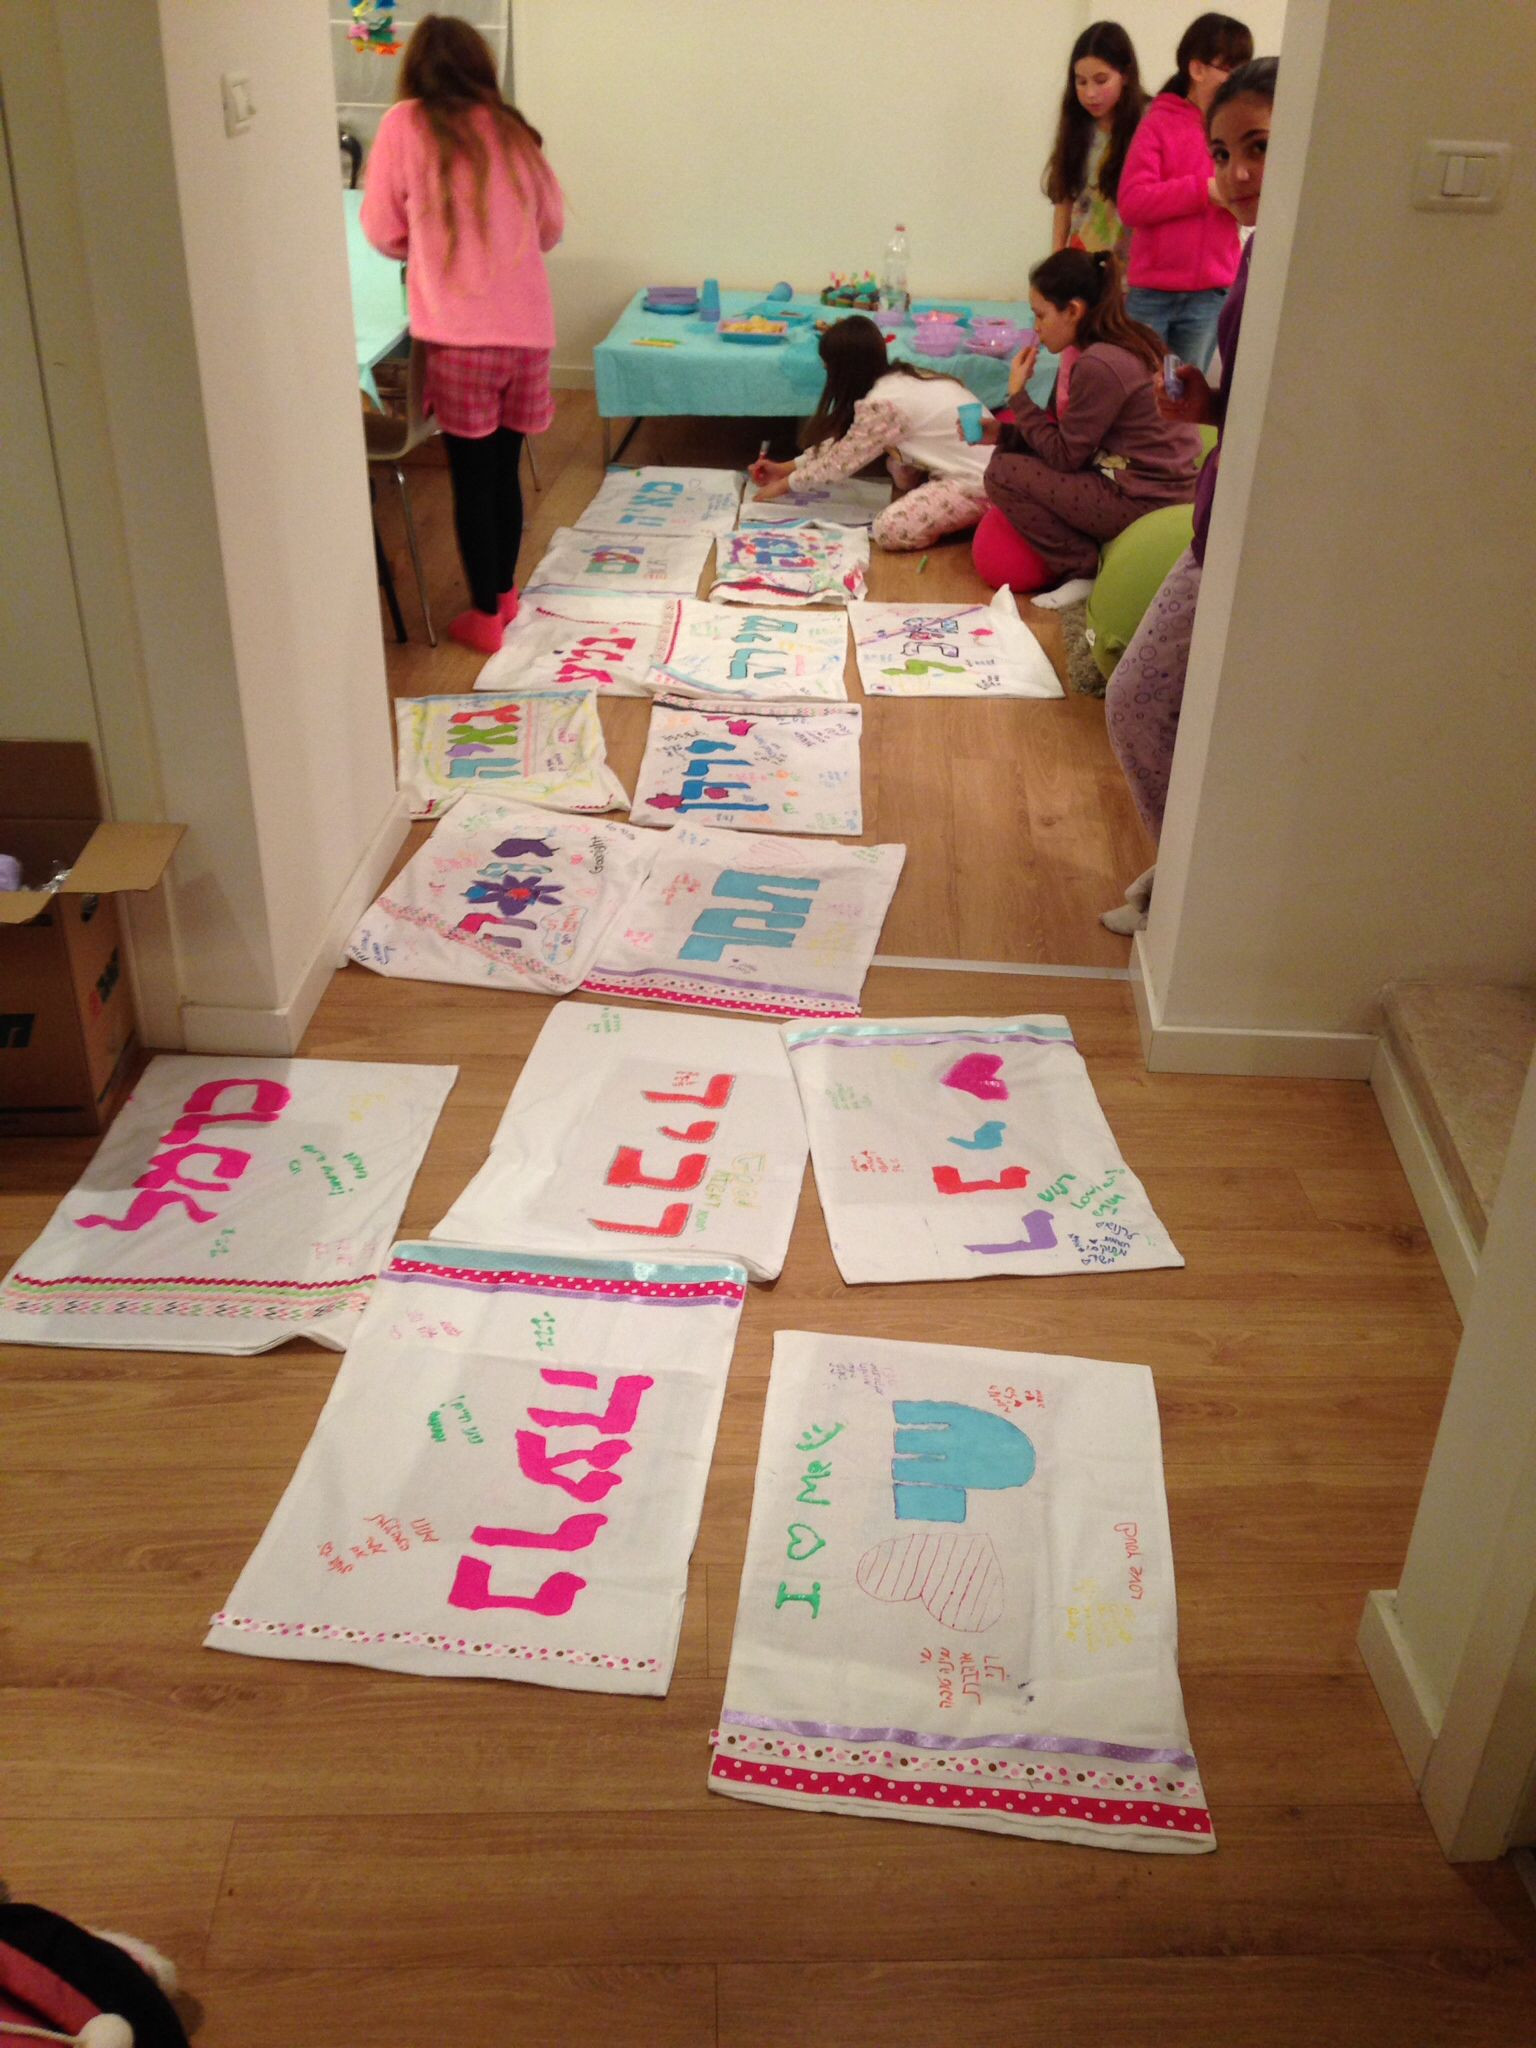 Birthday Party Ideas For 11 Year Olds
 Pillowcase crafts at 11 year old s pyjama party